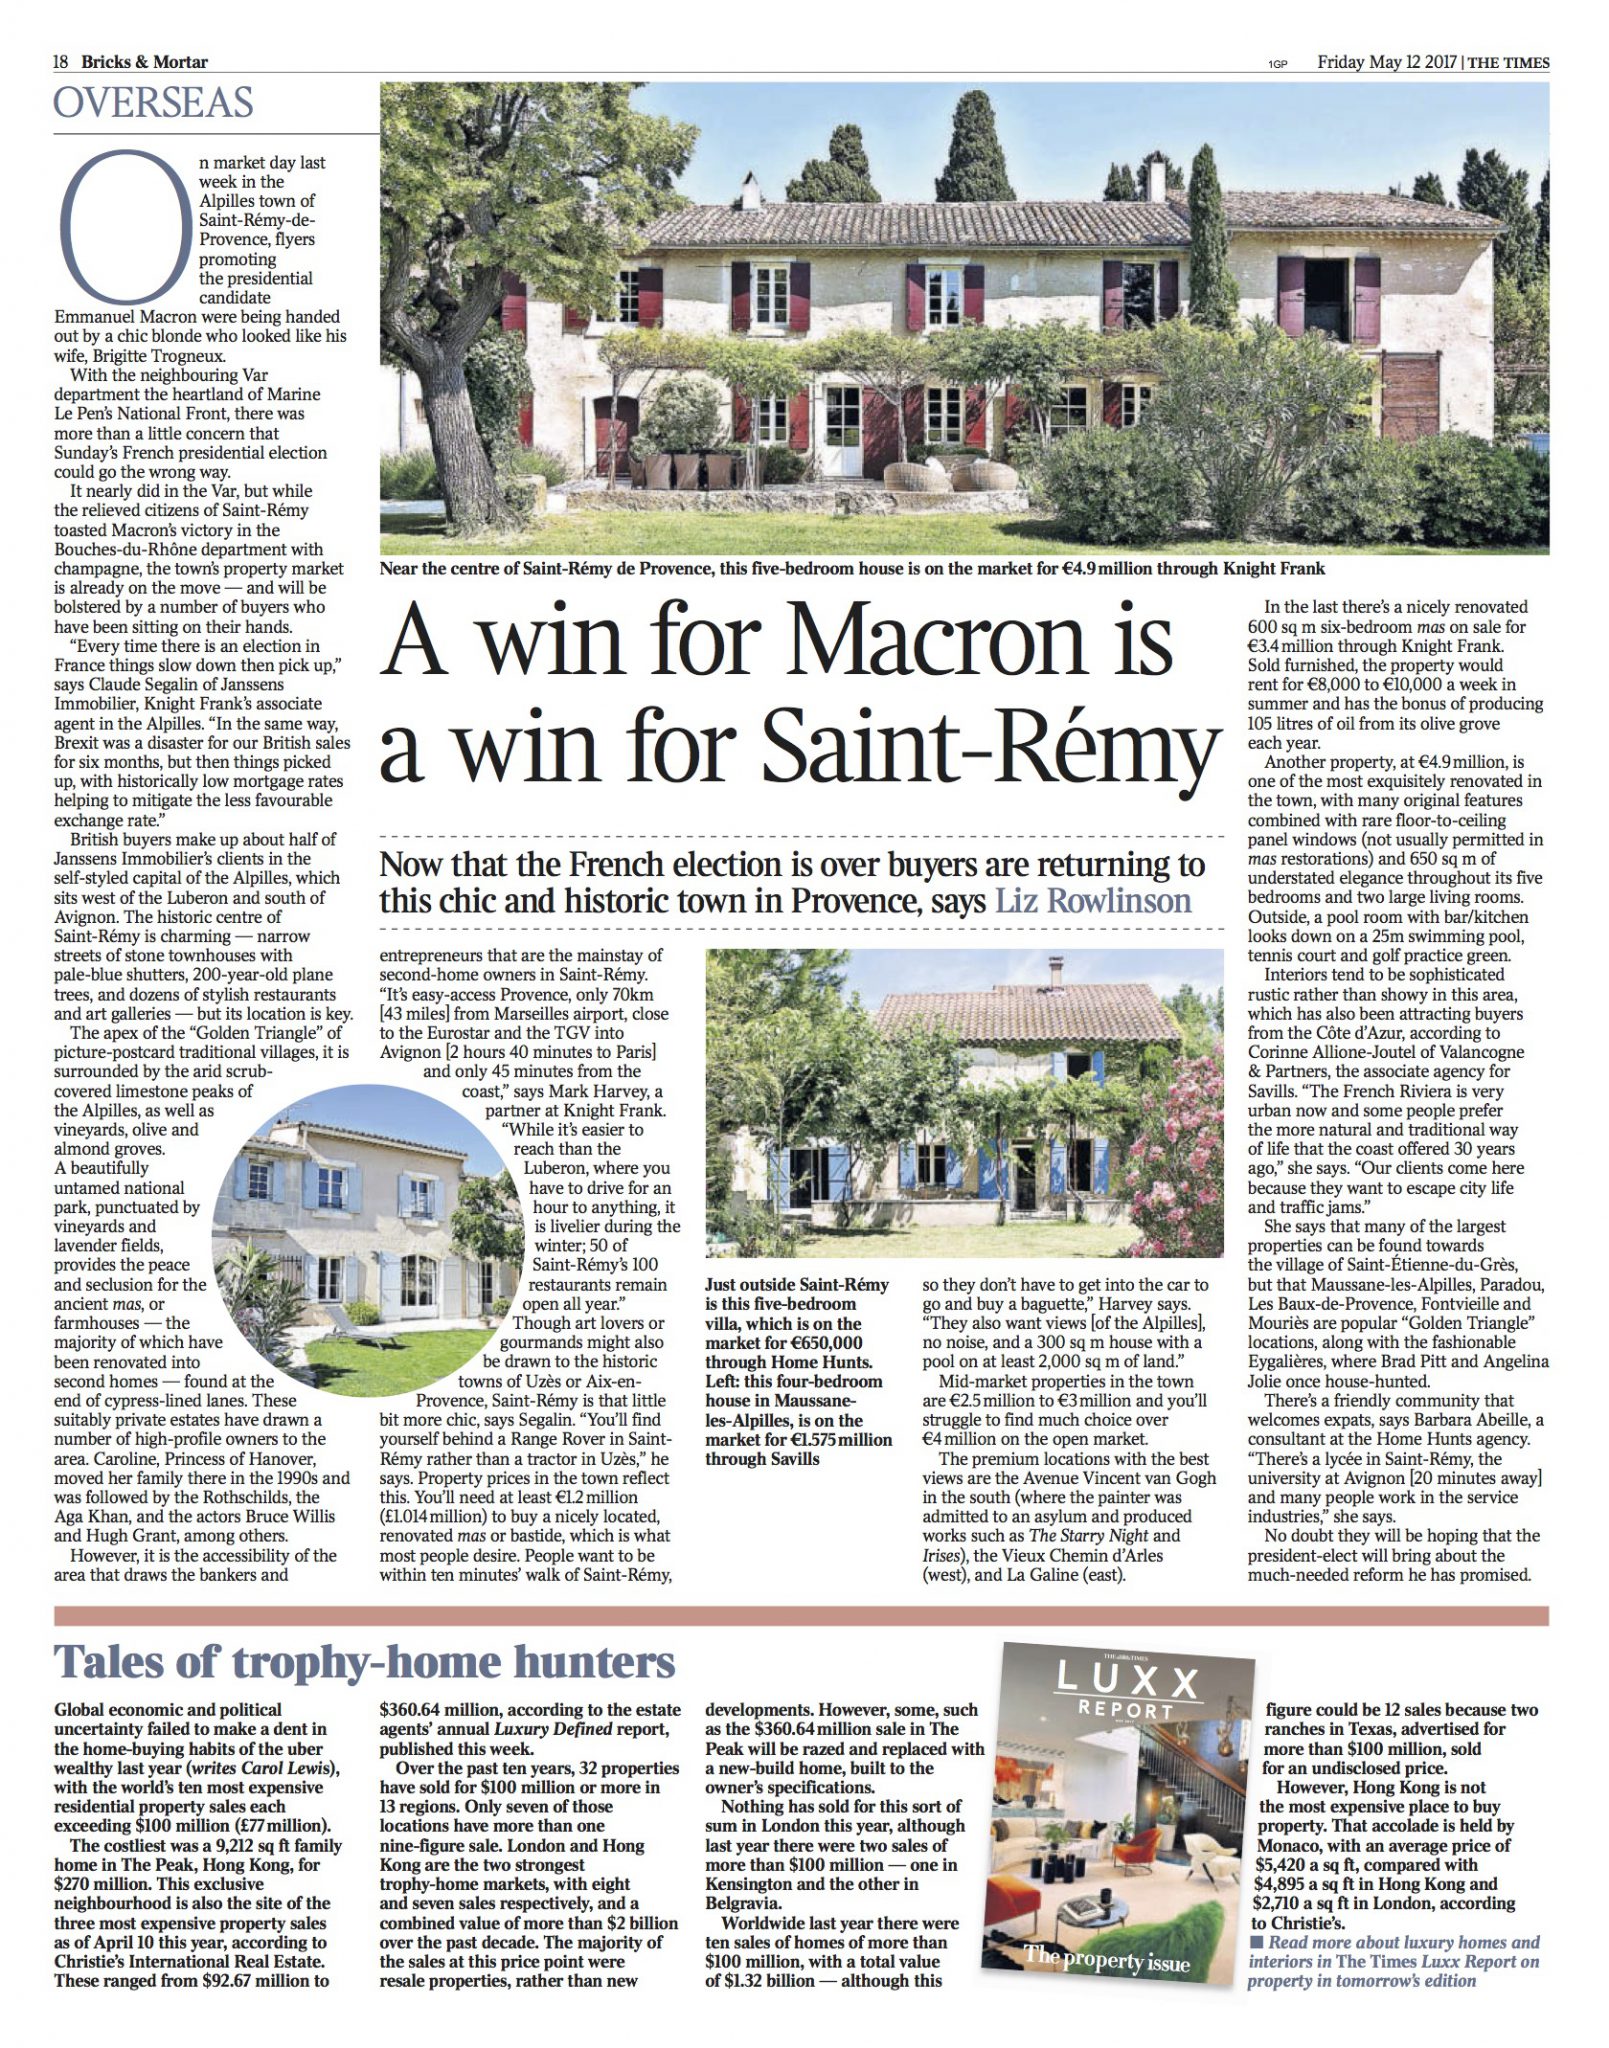 The Times – A Win for Macron is a win for Saint Remy de Provence